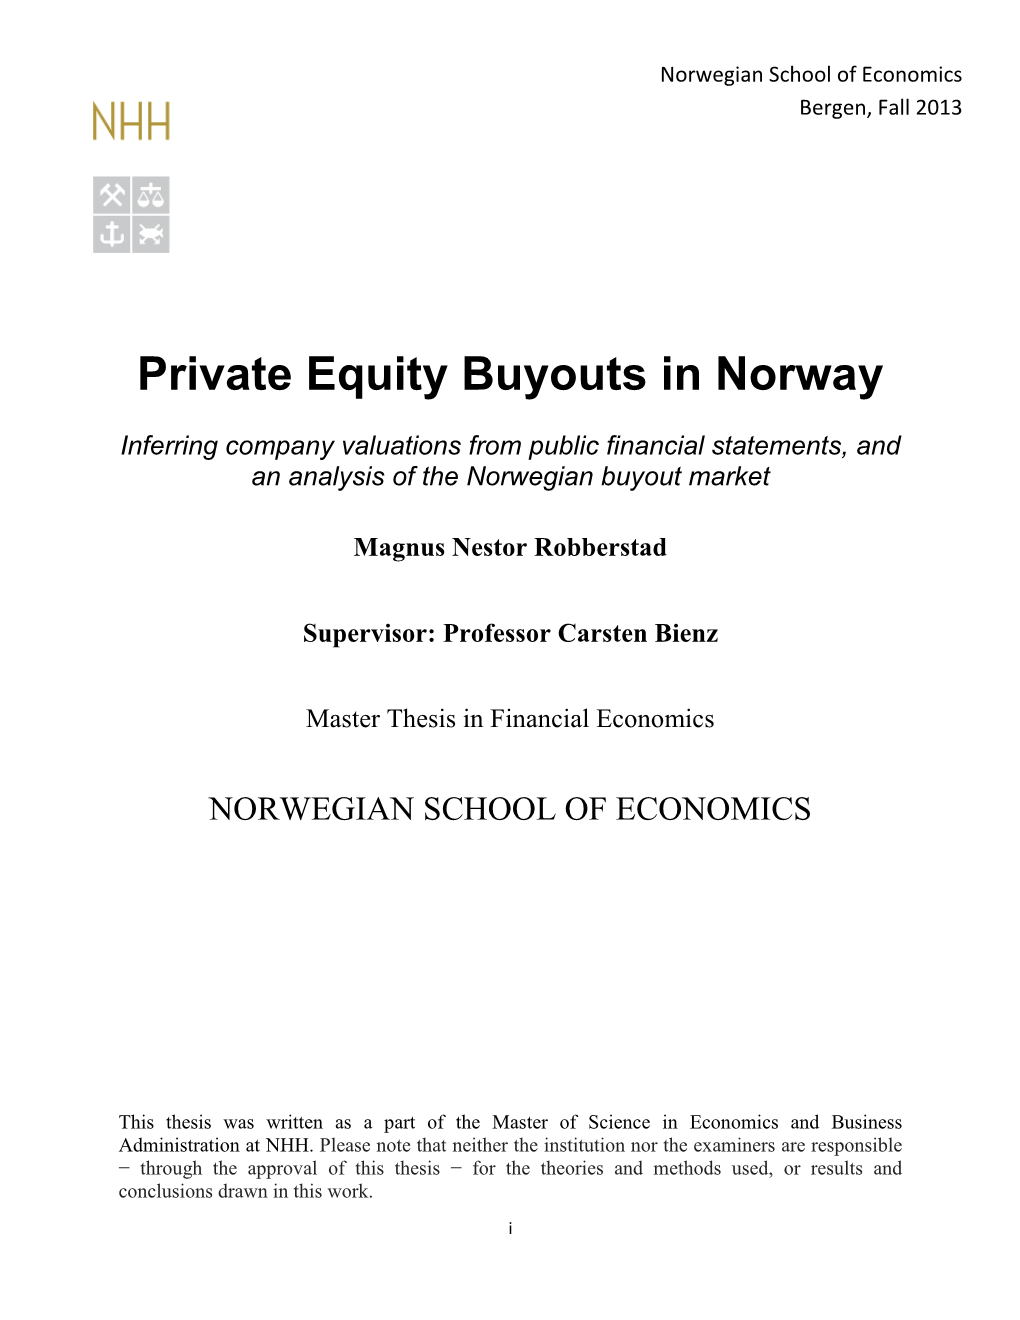 Private Equity Buyouts in Norway